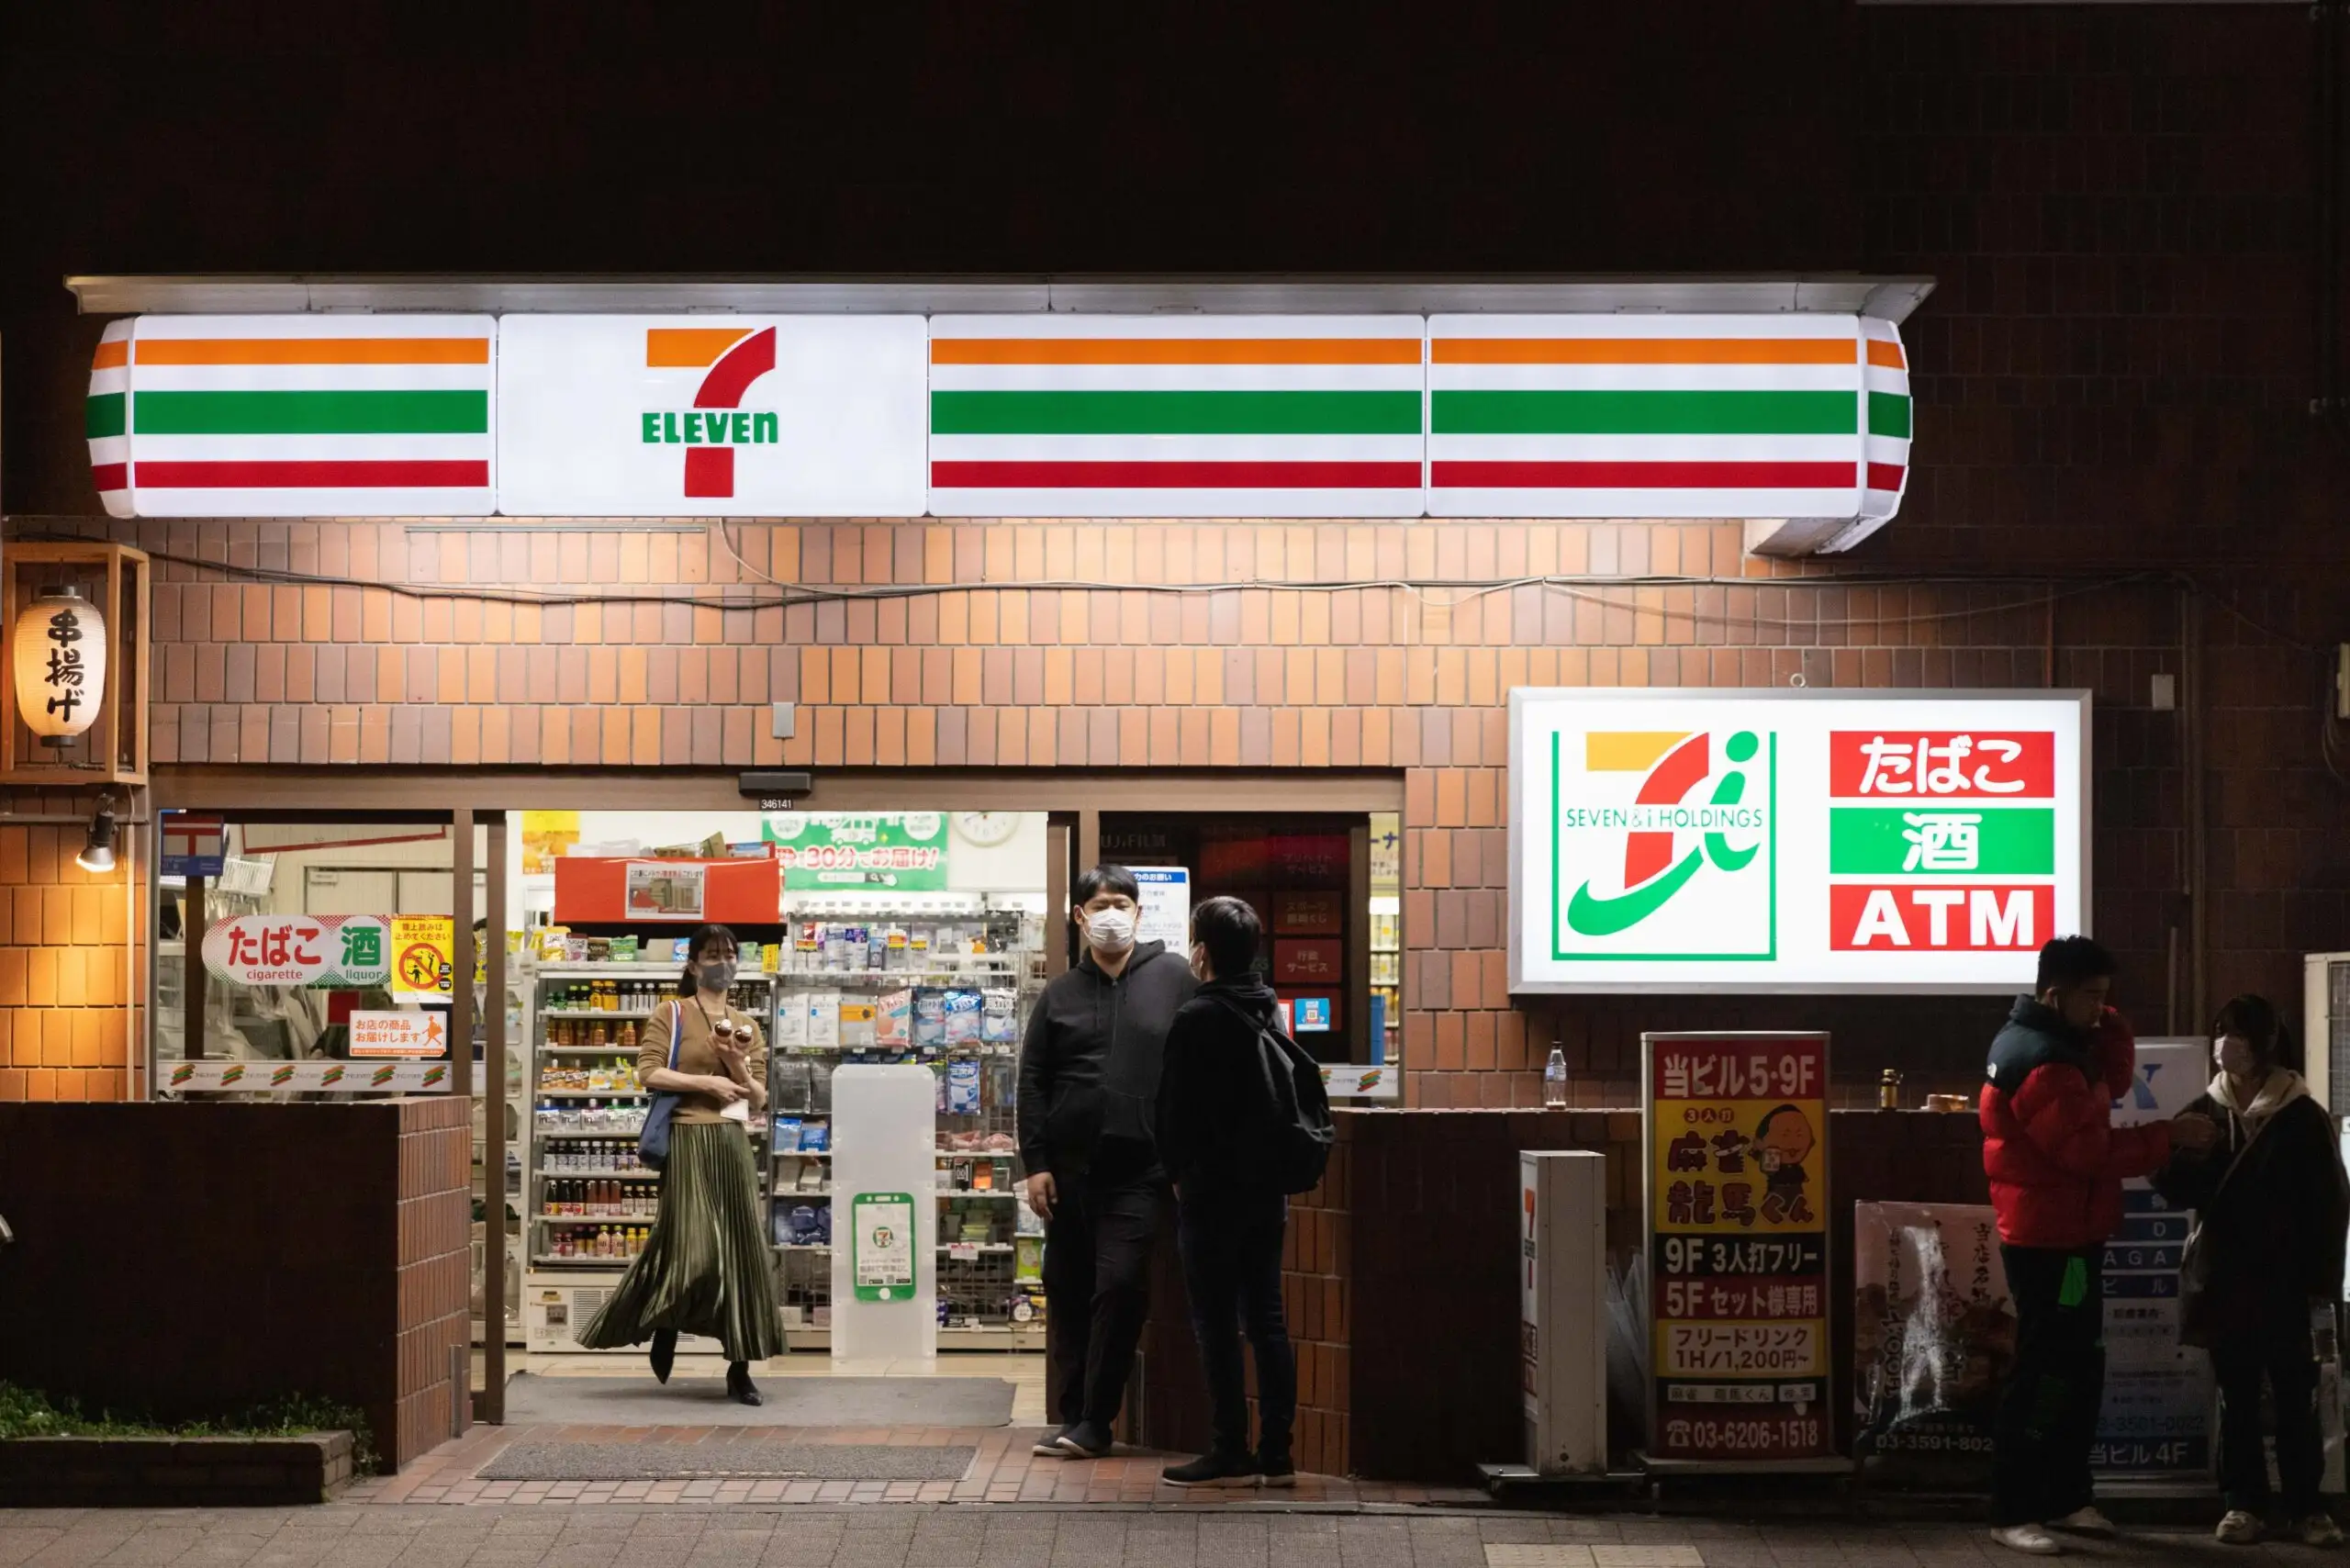 7-Eleven in Japan dials convenience up to… well, eleven.